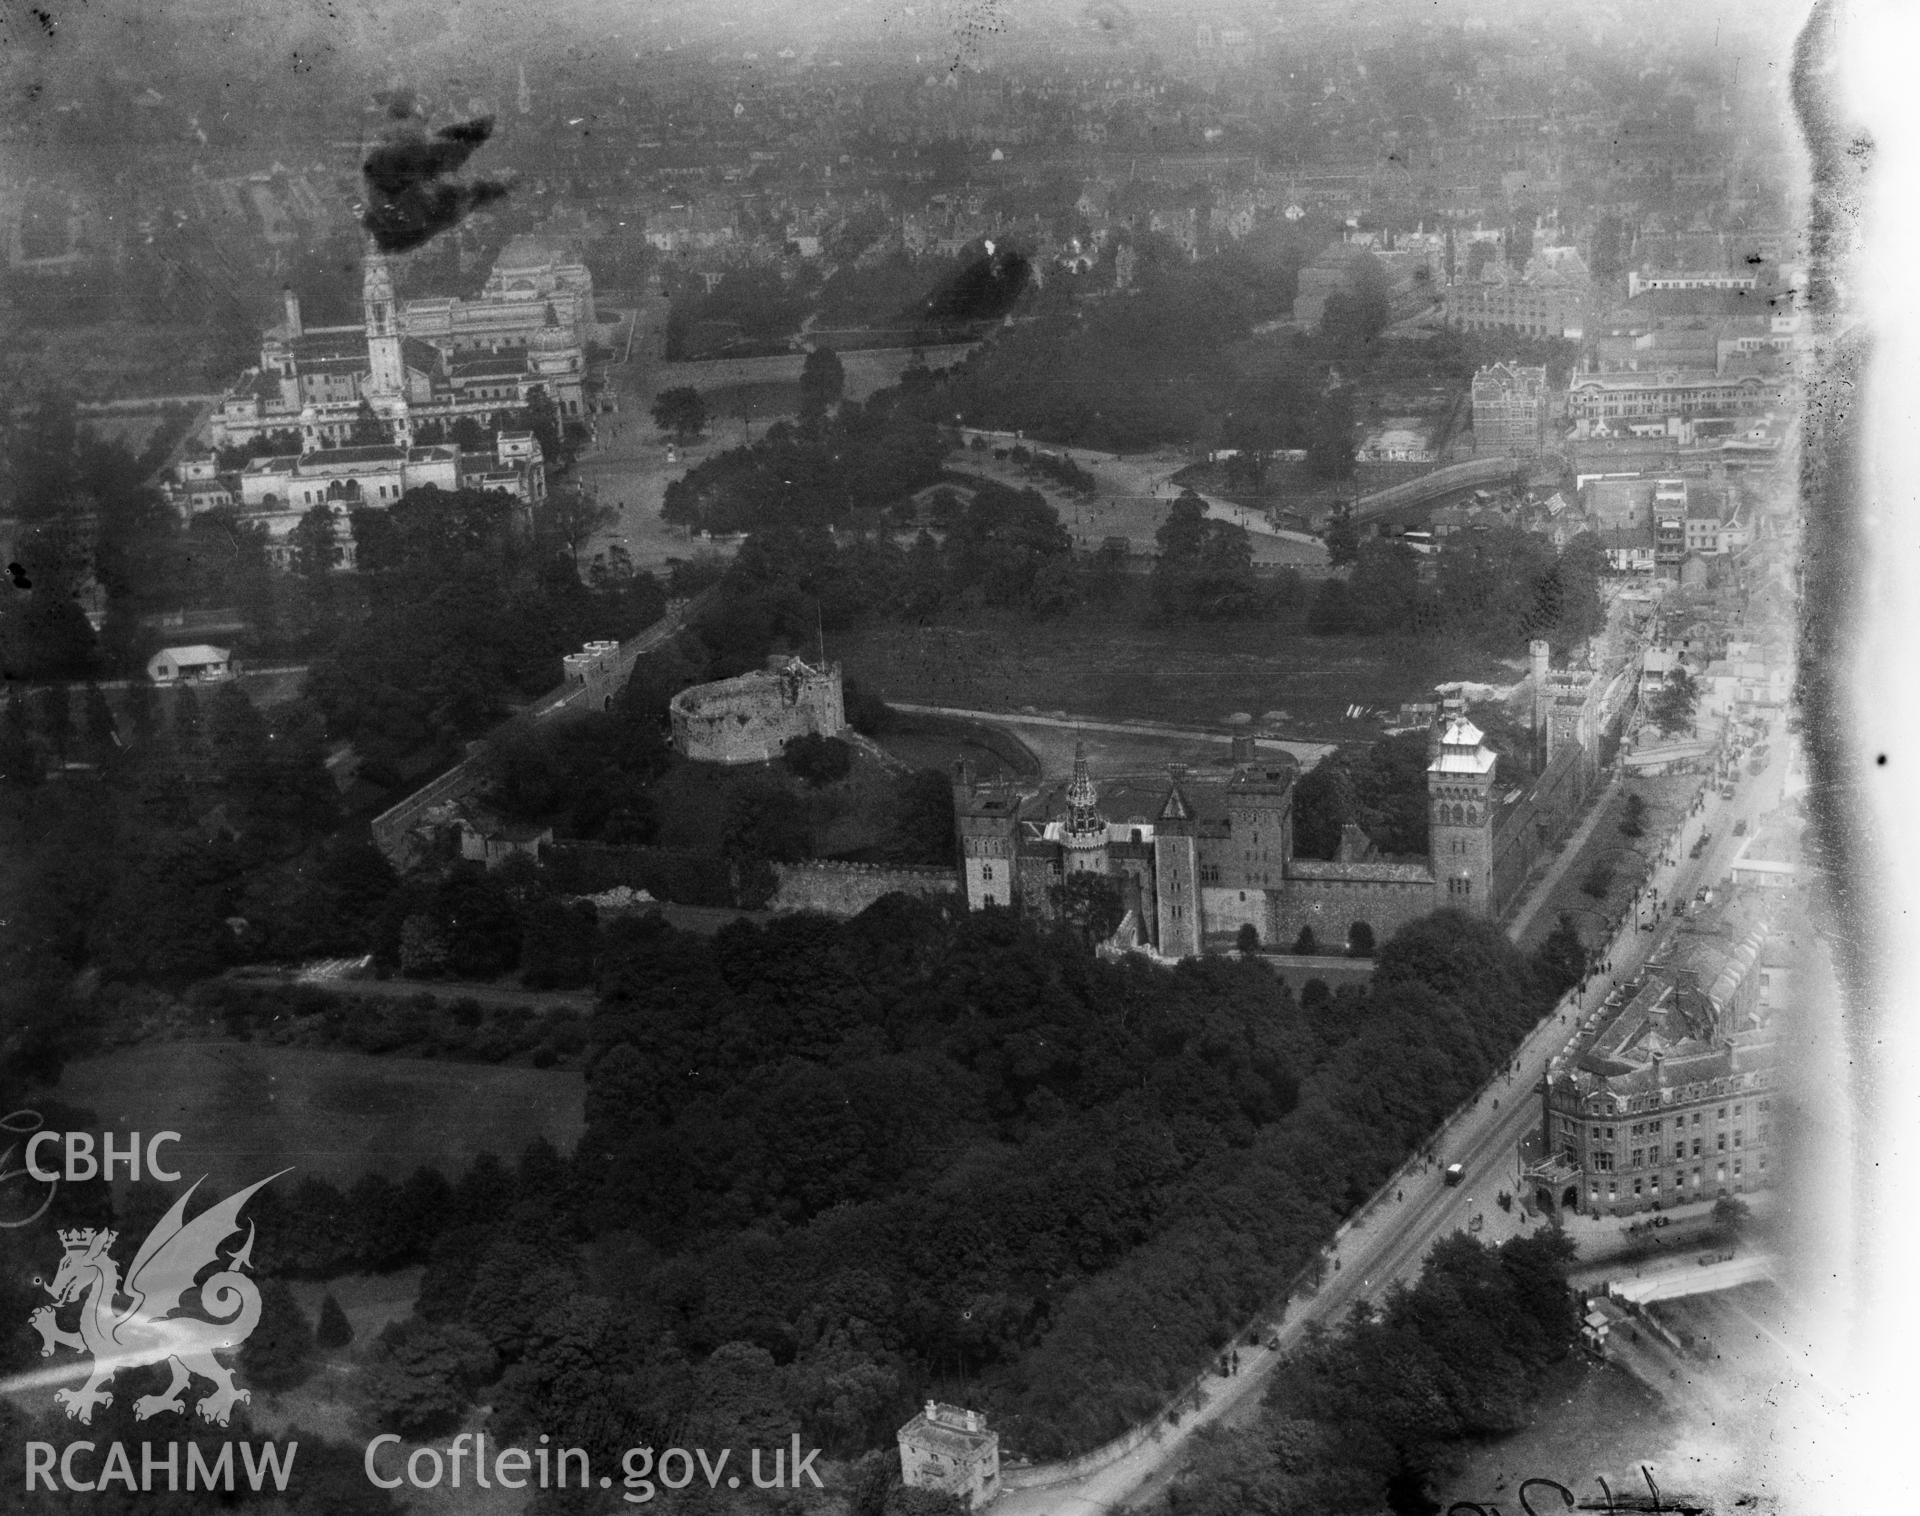 View of Cardif showing castle, oblique aerial view. 5?x4? black and white glass plate negative.